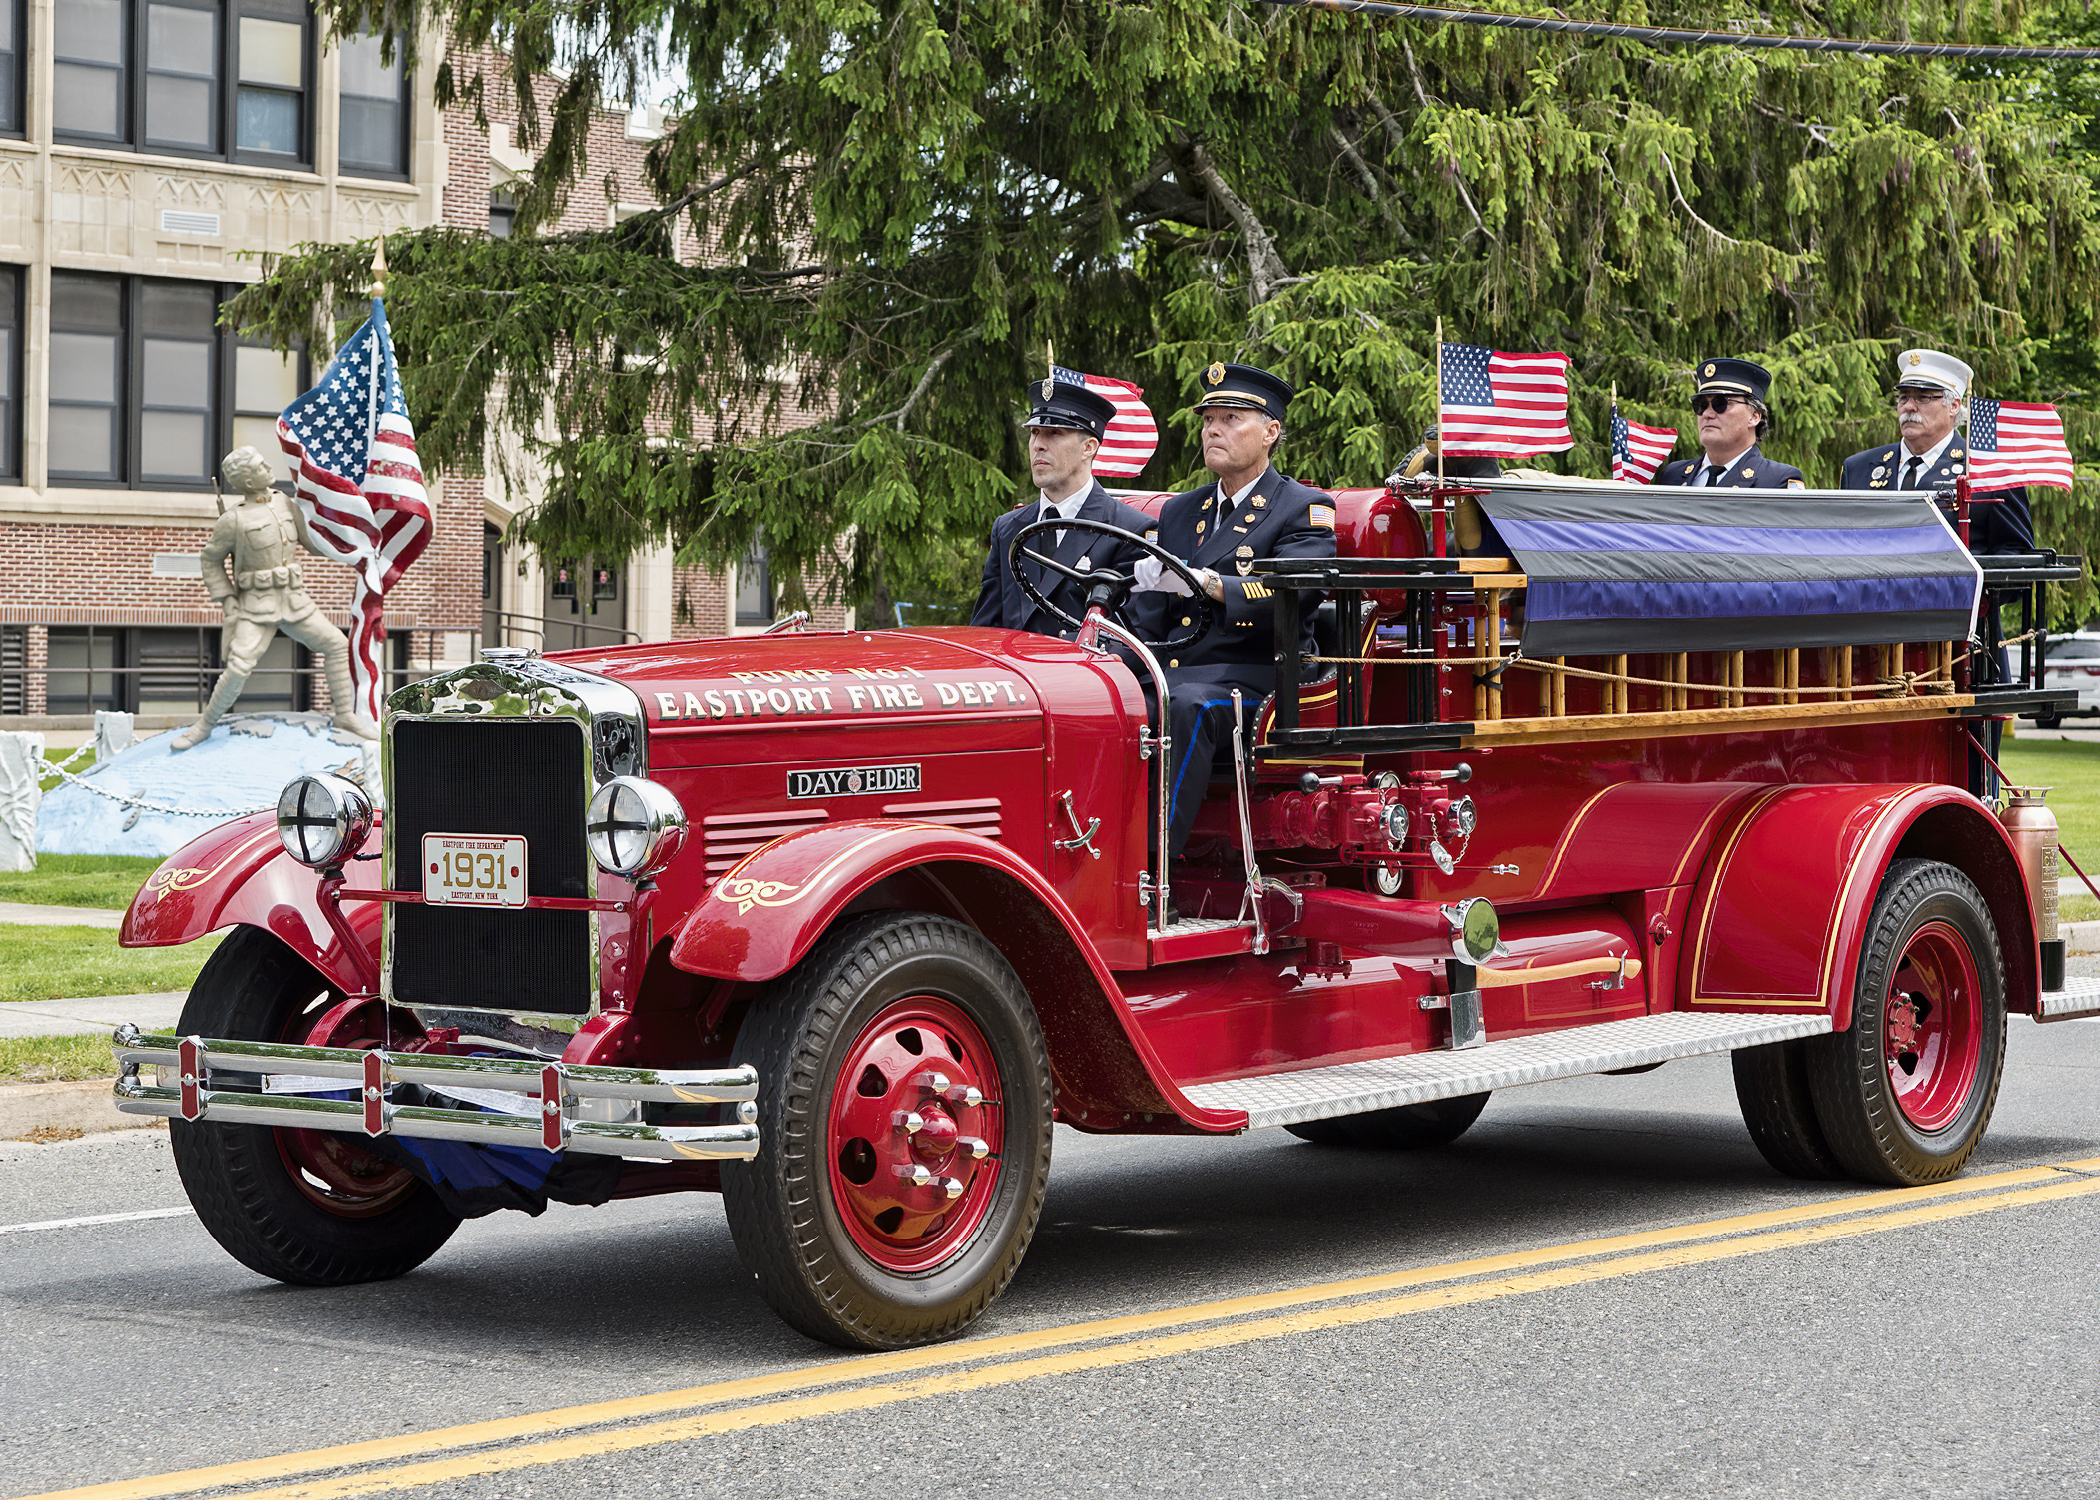 The Eastport Fire Department’s antique pumper carries the remains of Eastport Fire Department ex-chief and 65-year member James “Jimmy” Baker past the Eastport Elementary School enroute to the cemetery last Wednesday morning.